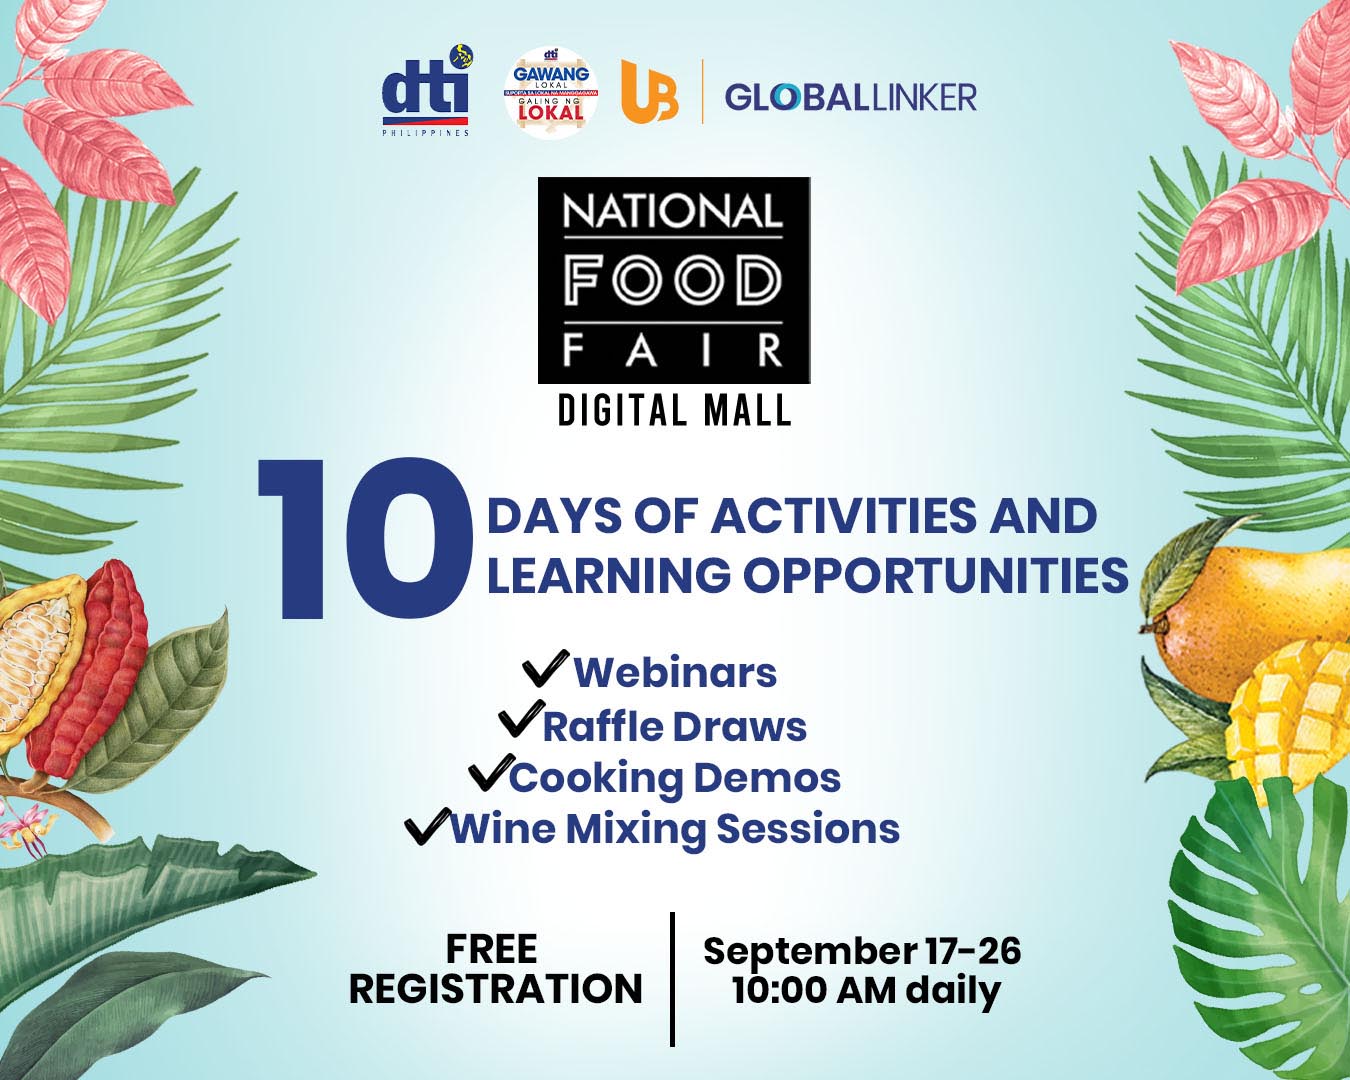 10 Days of Activities and Learning Opportunities at the 2021 Hybrid National Food Fair